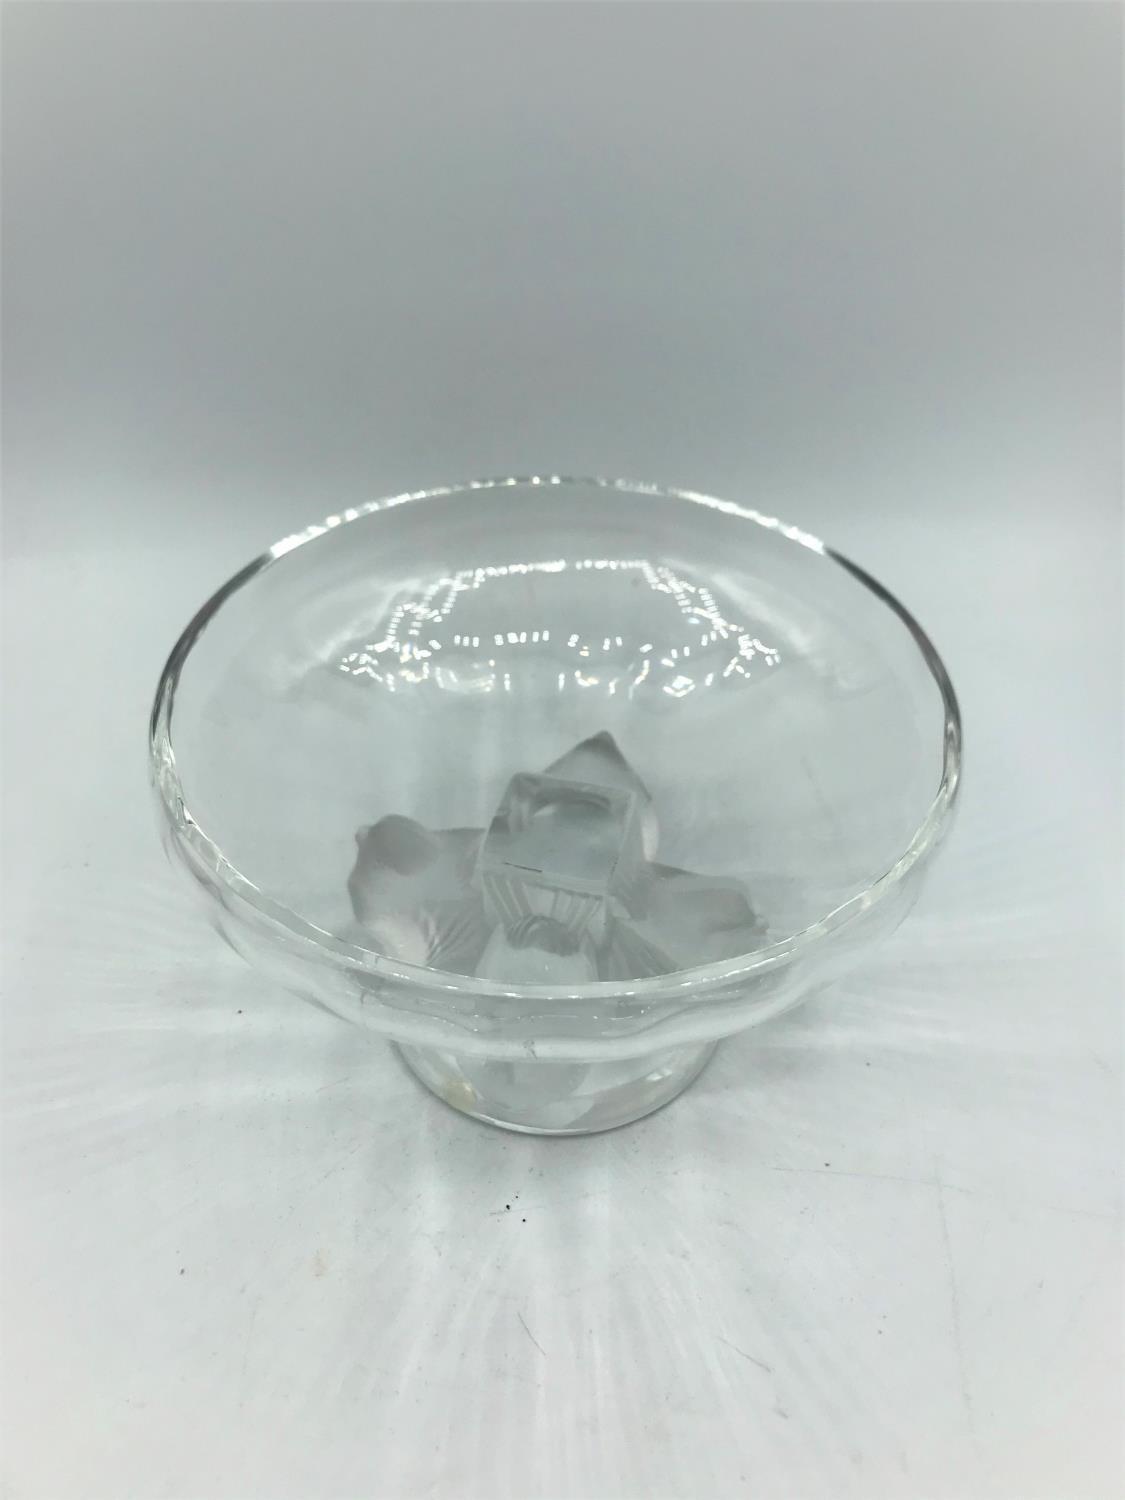 Lalique glass bowl (J0490) with 4 birds on stem and clear Lalique France marking, weight 592g and - Image 2 of 4